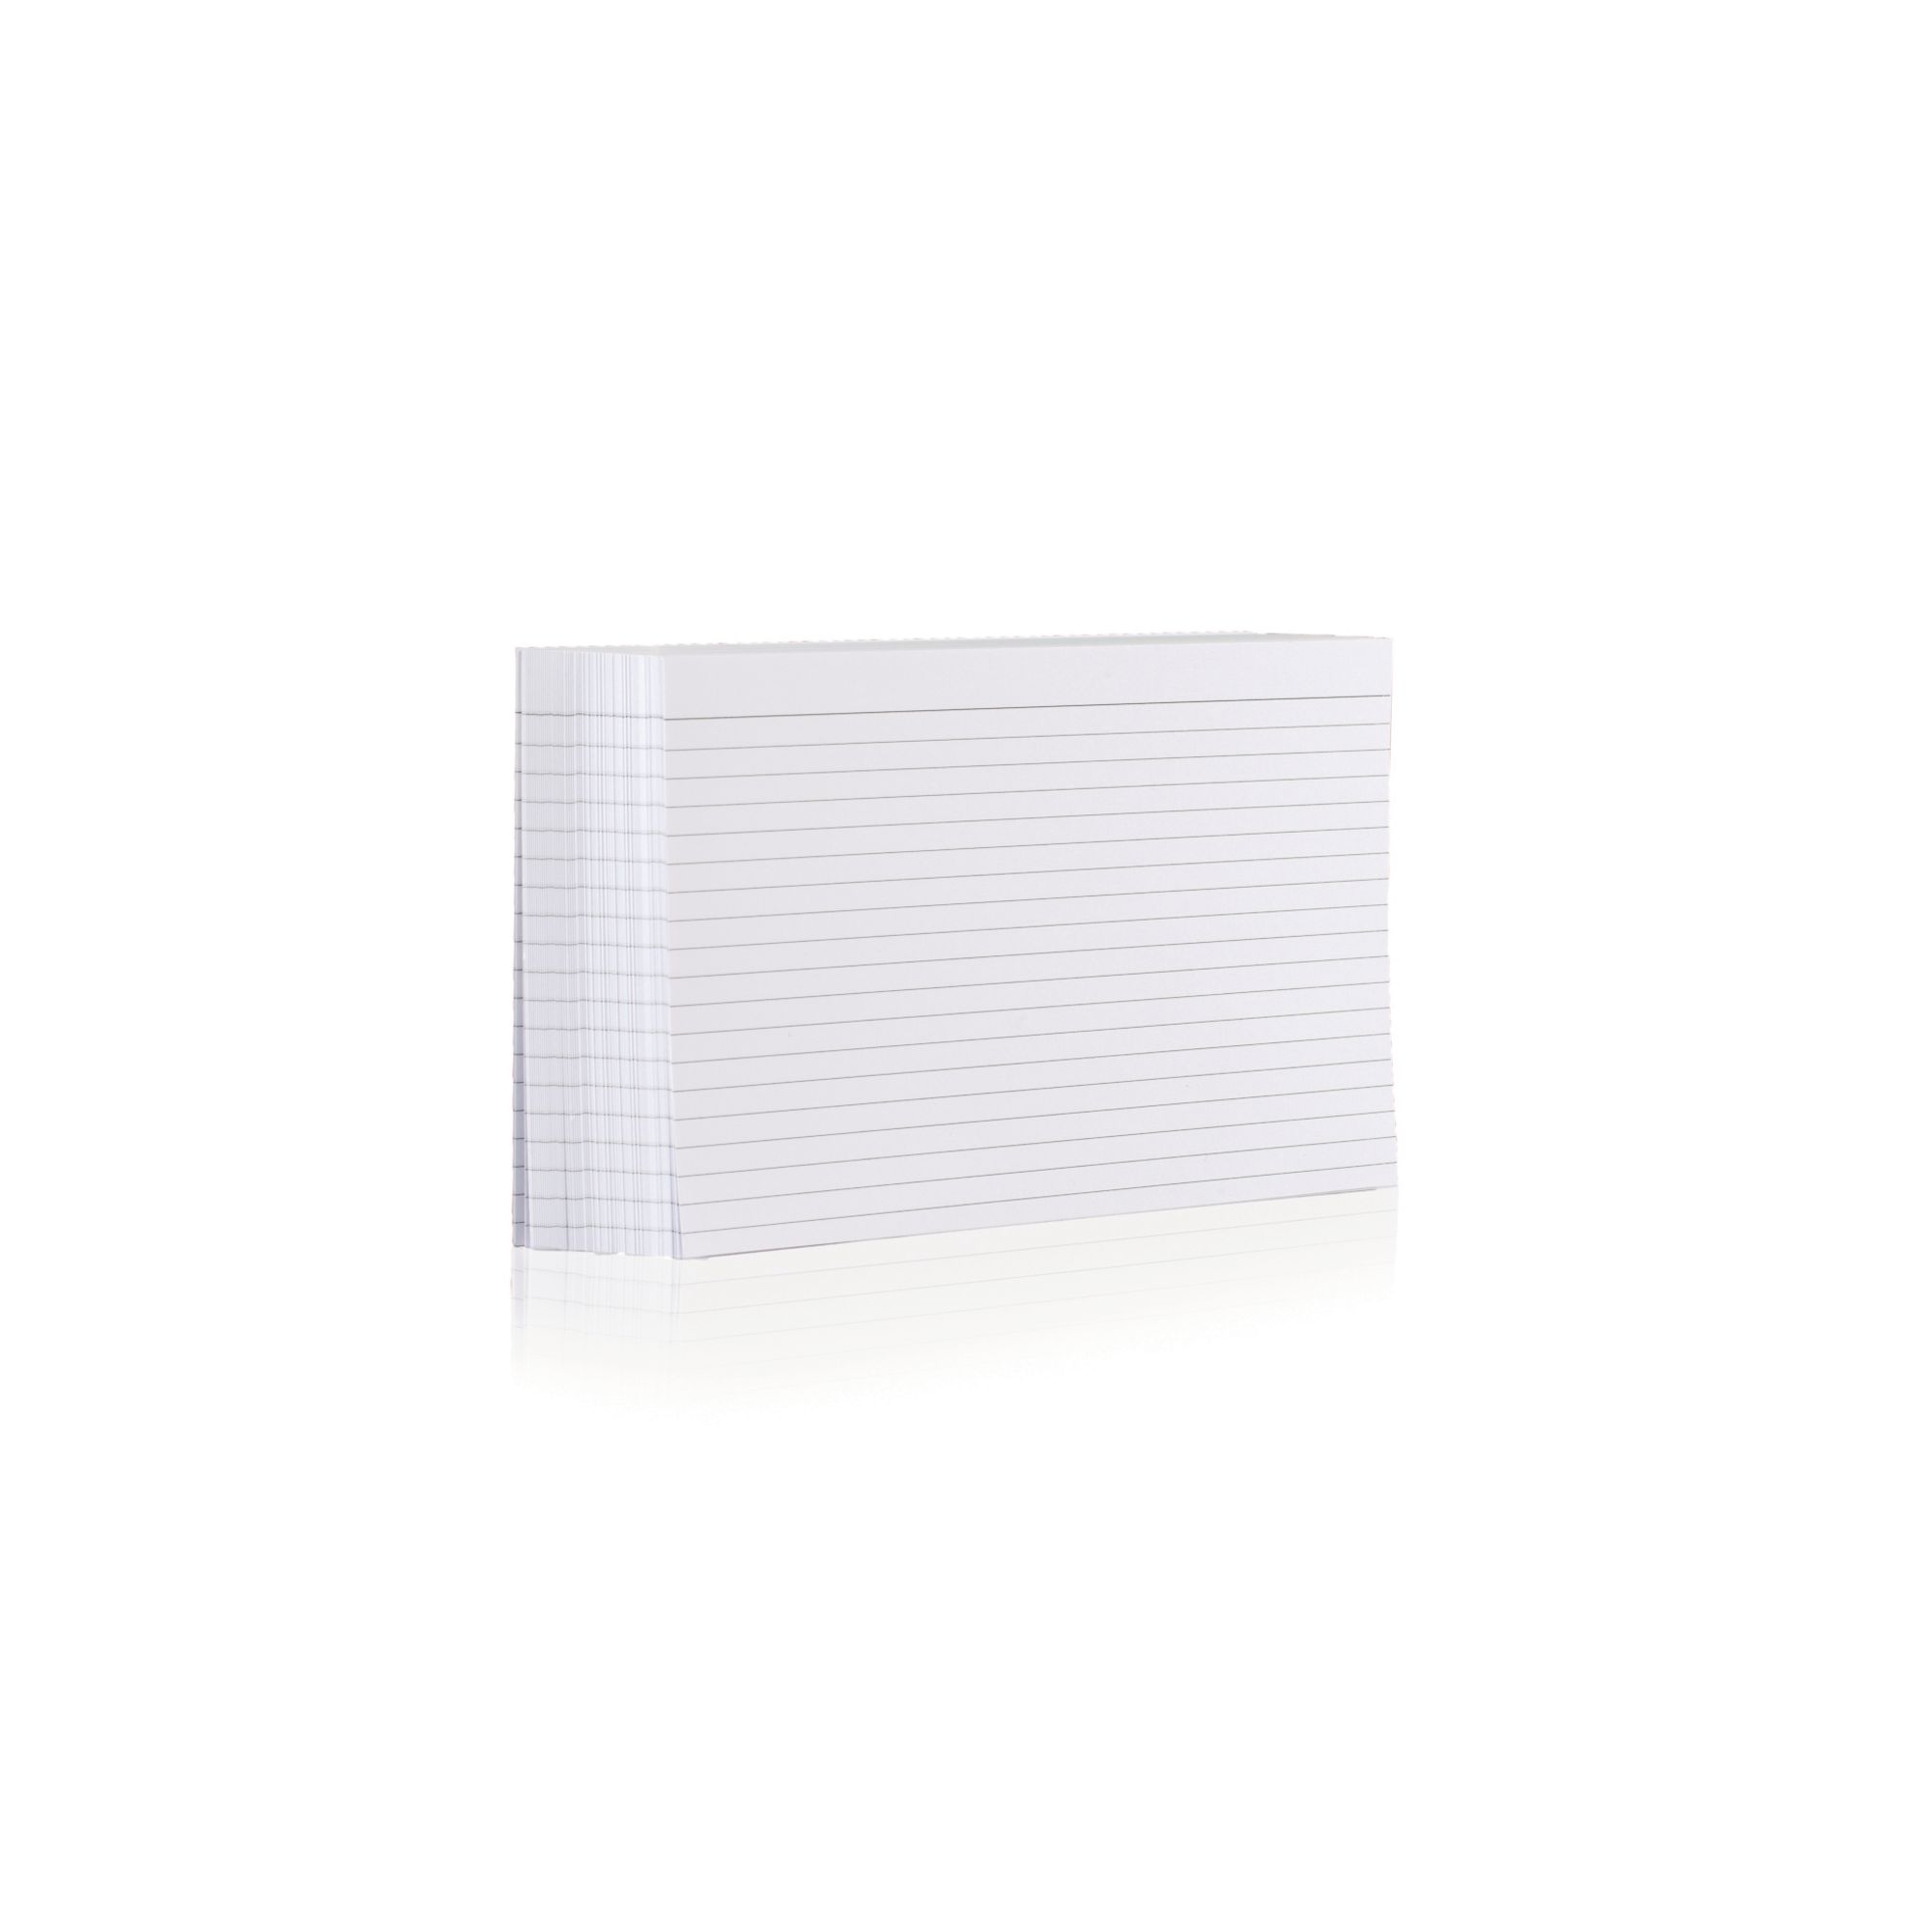 Record Card 203 x 127mm White - Pack of 100